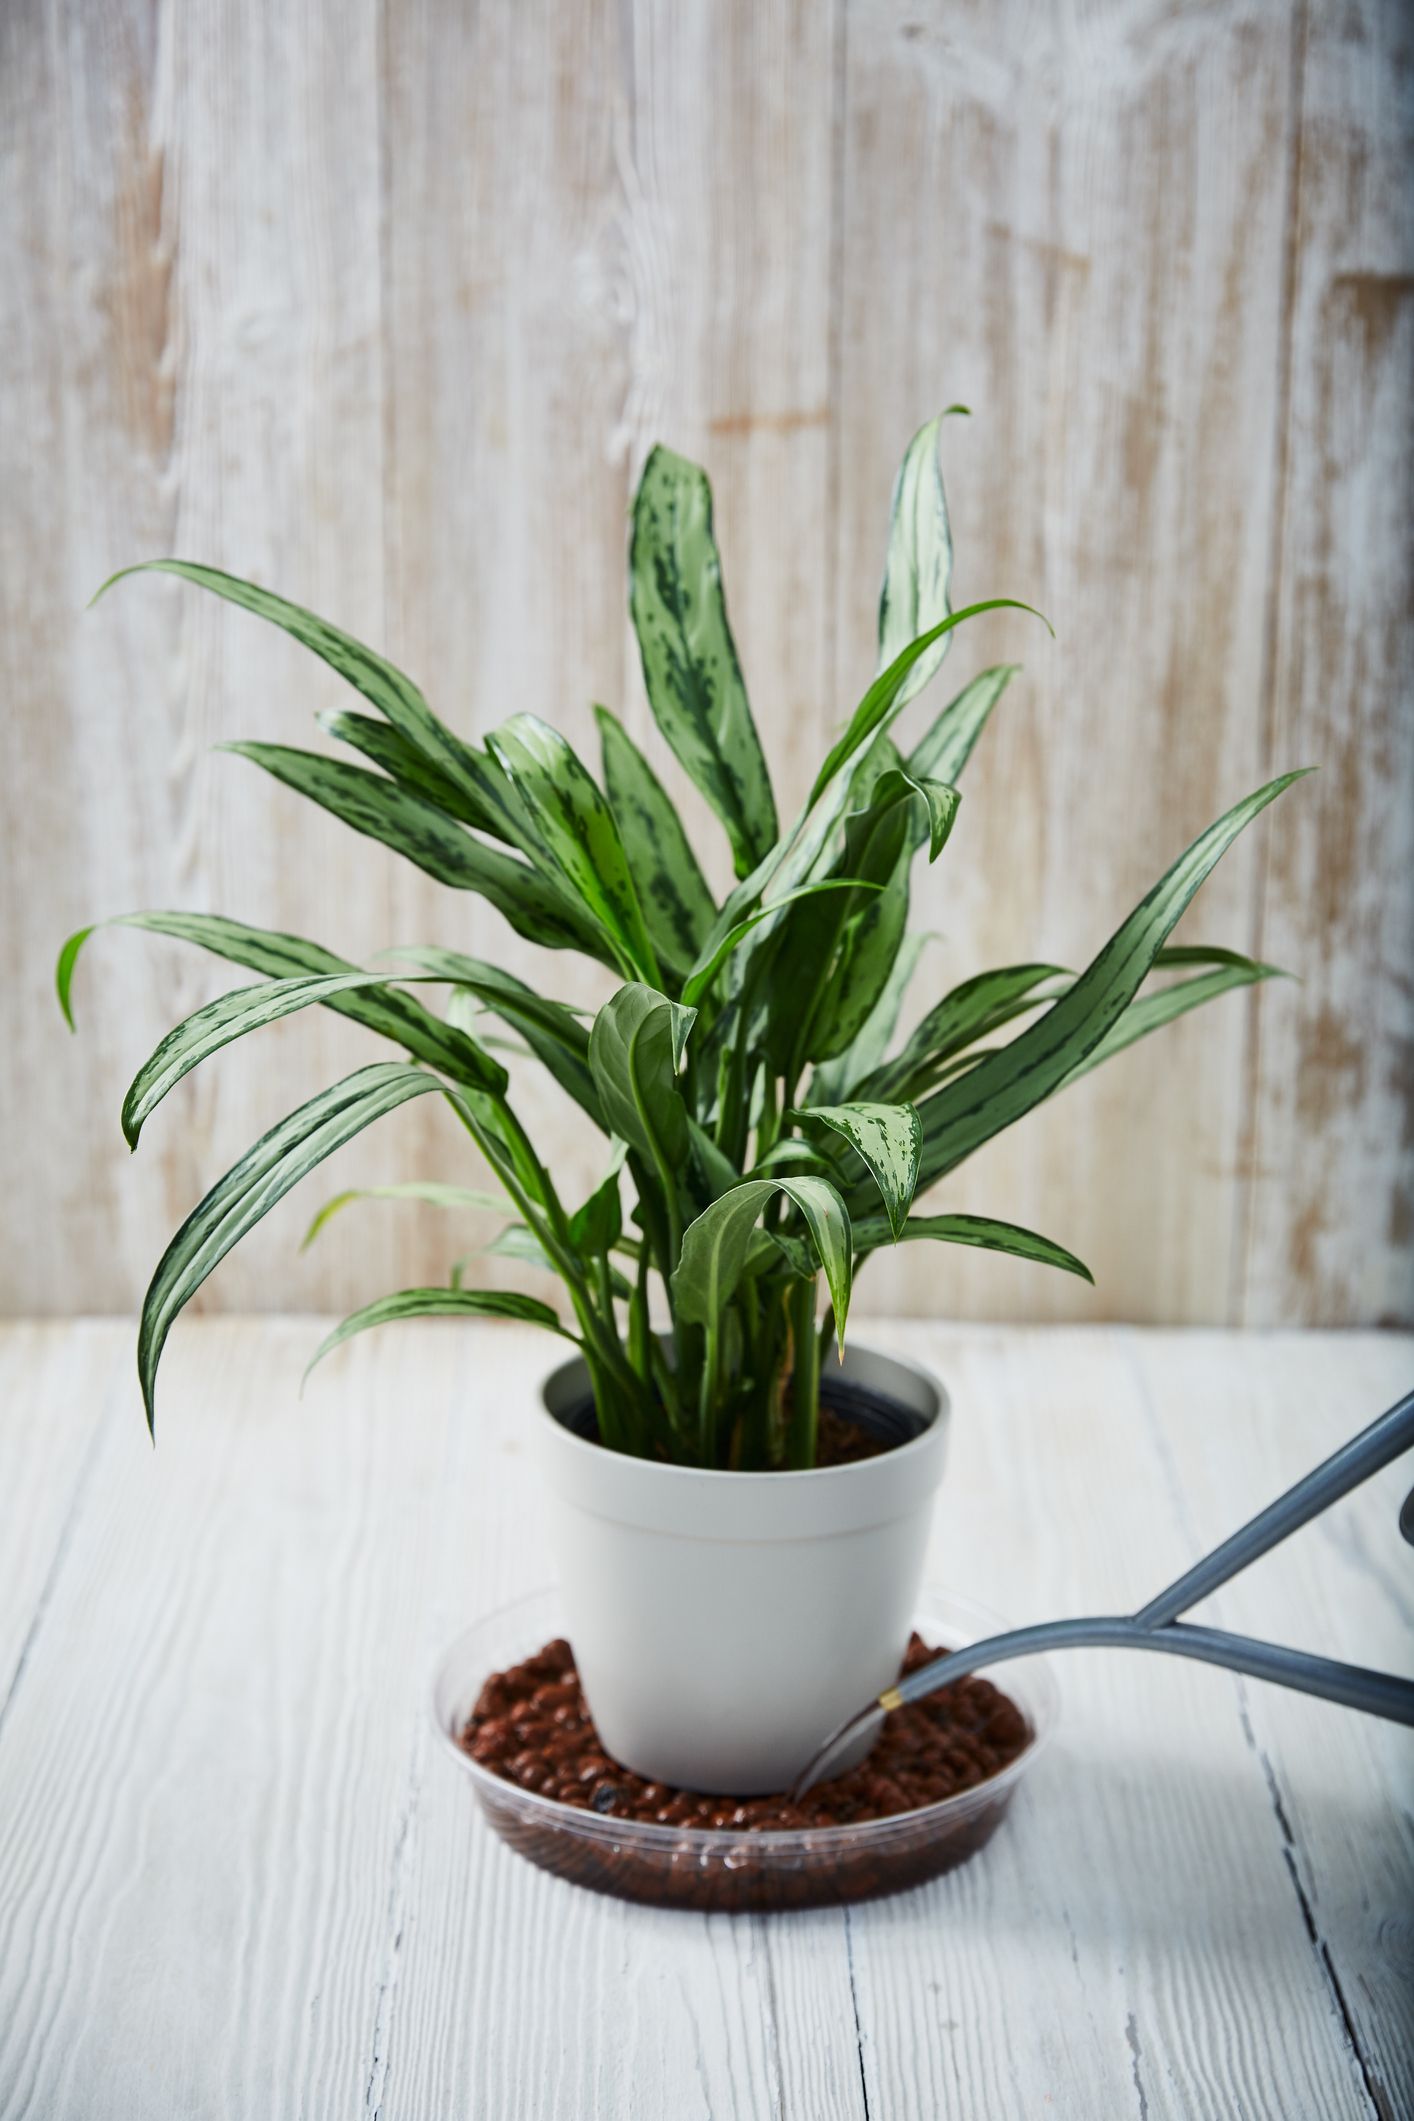 15 Best Bathroom Plants Best Plants For Showers And Bathrooms